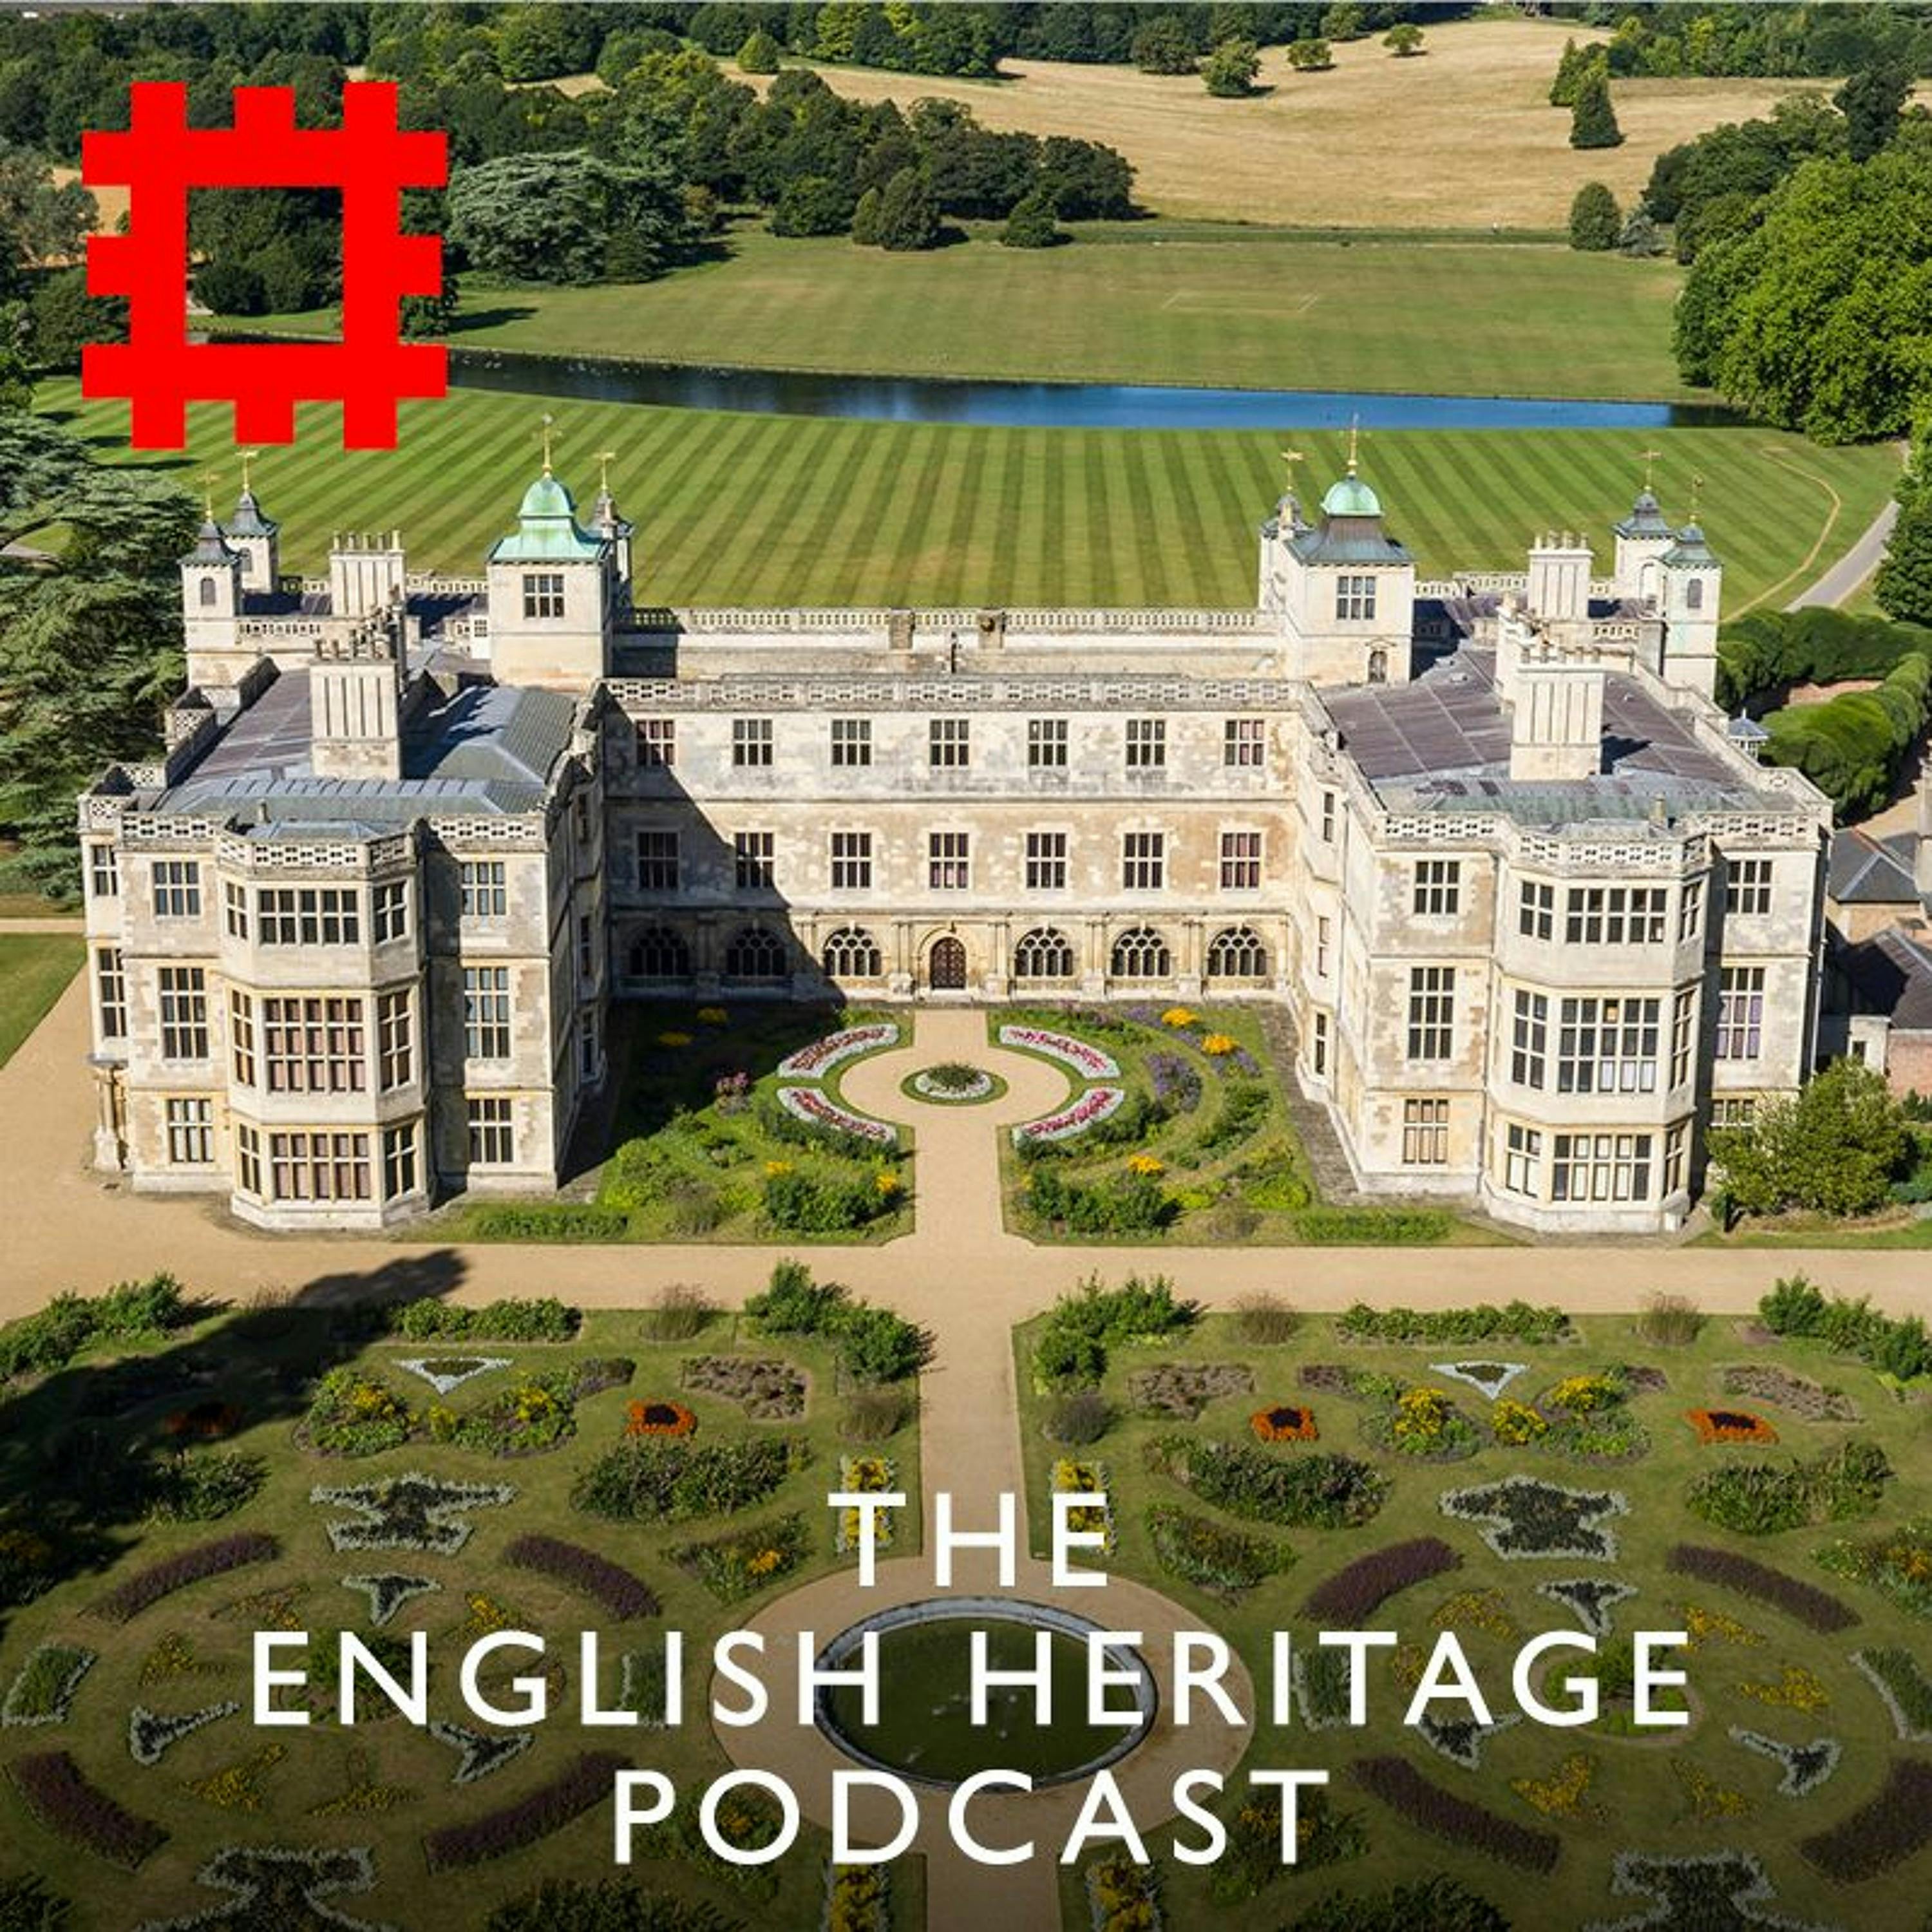 Episode 232 - A delight for the senses at our historic gardens